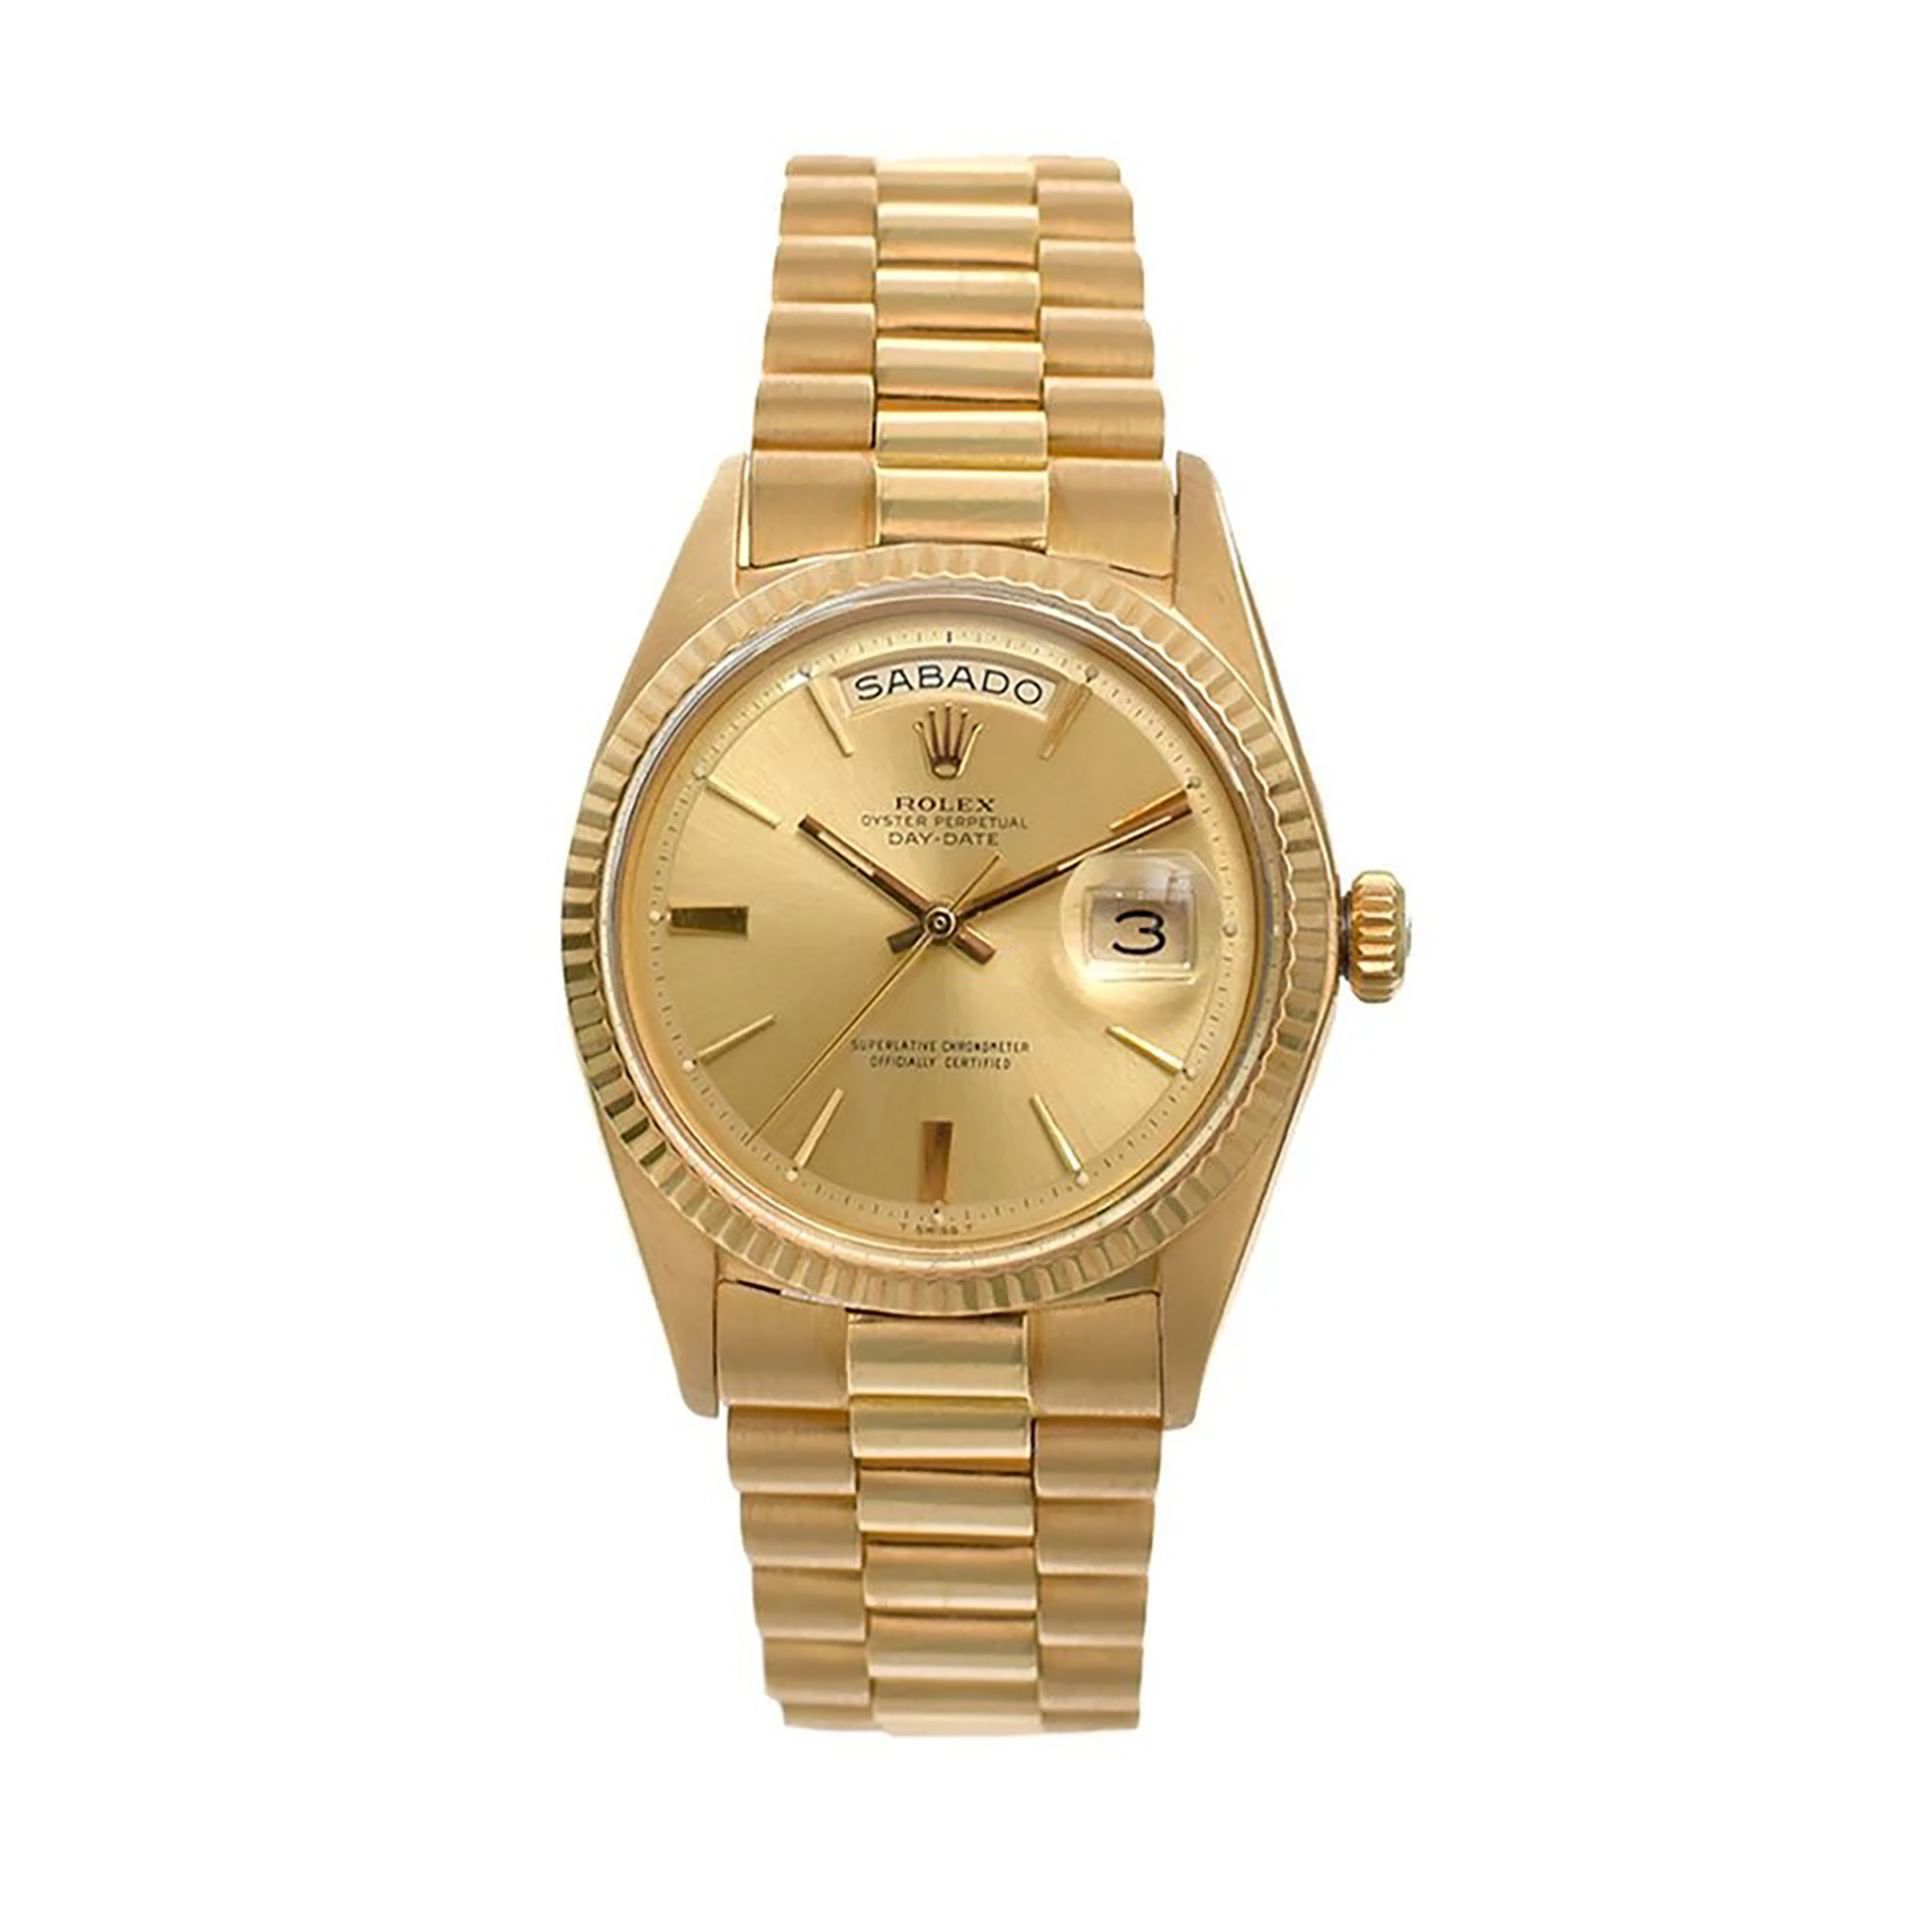 Important Rolex Day-Date wristwatch from 1968 Model "Kennedy" in 18k solid gold